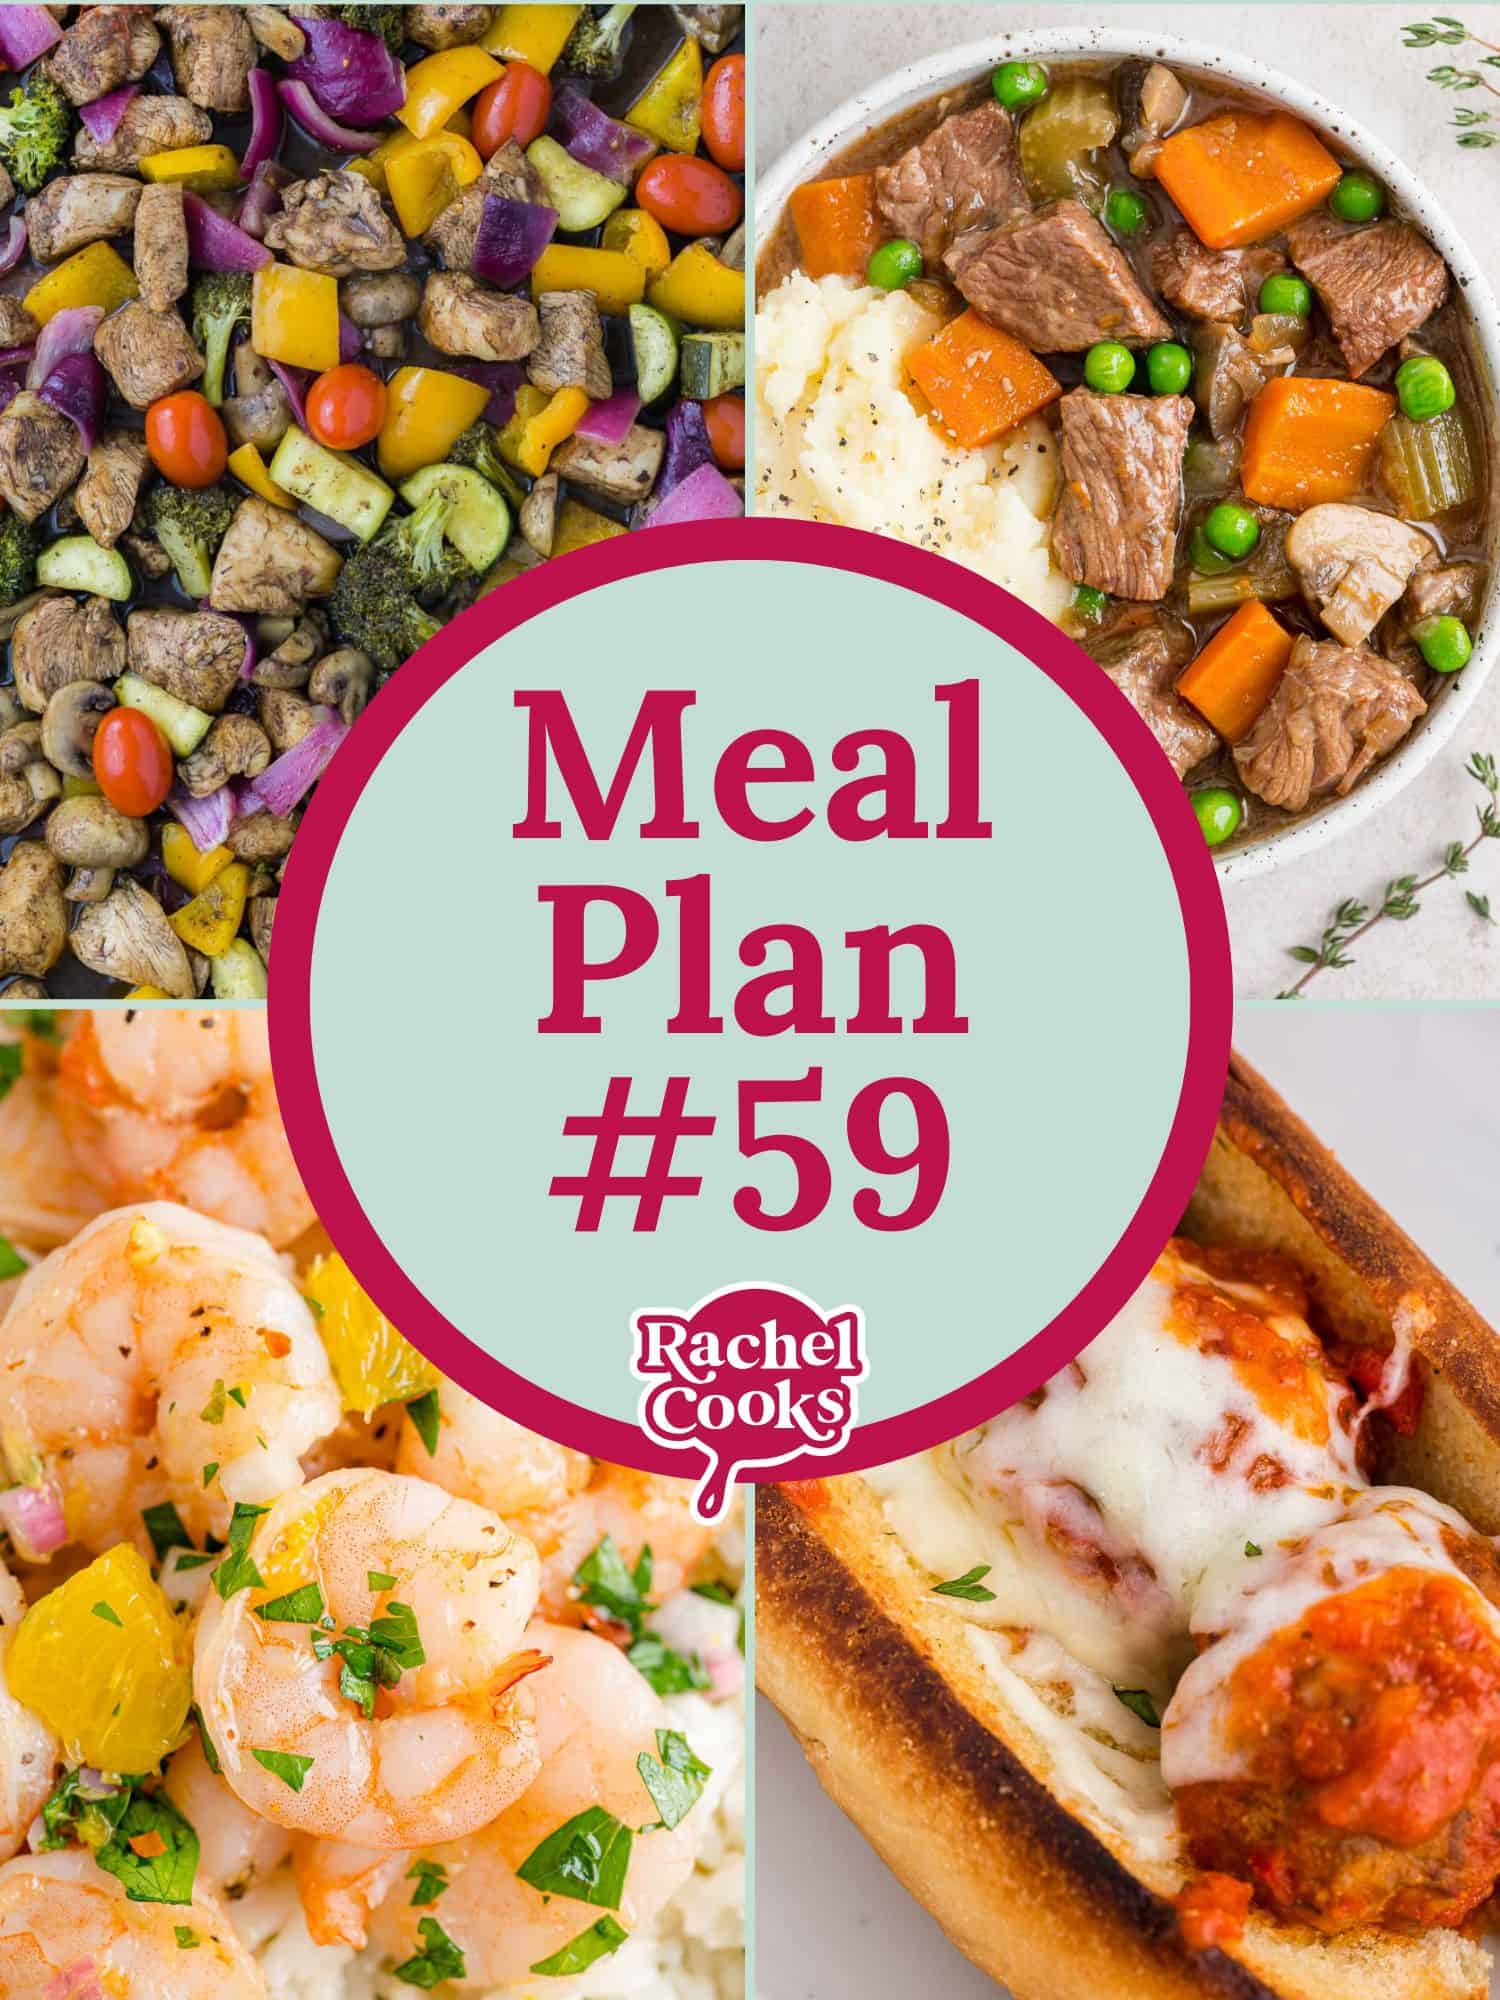 Meal plan 59 graphic with text and photos.